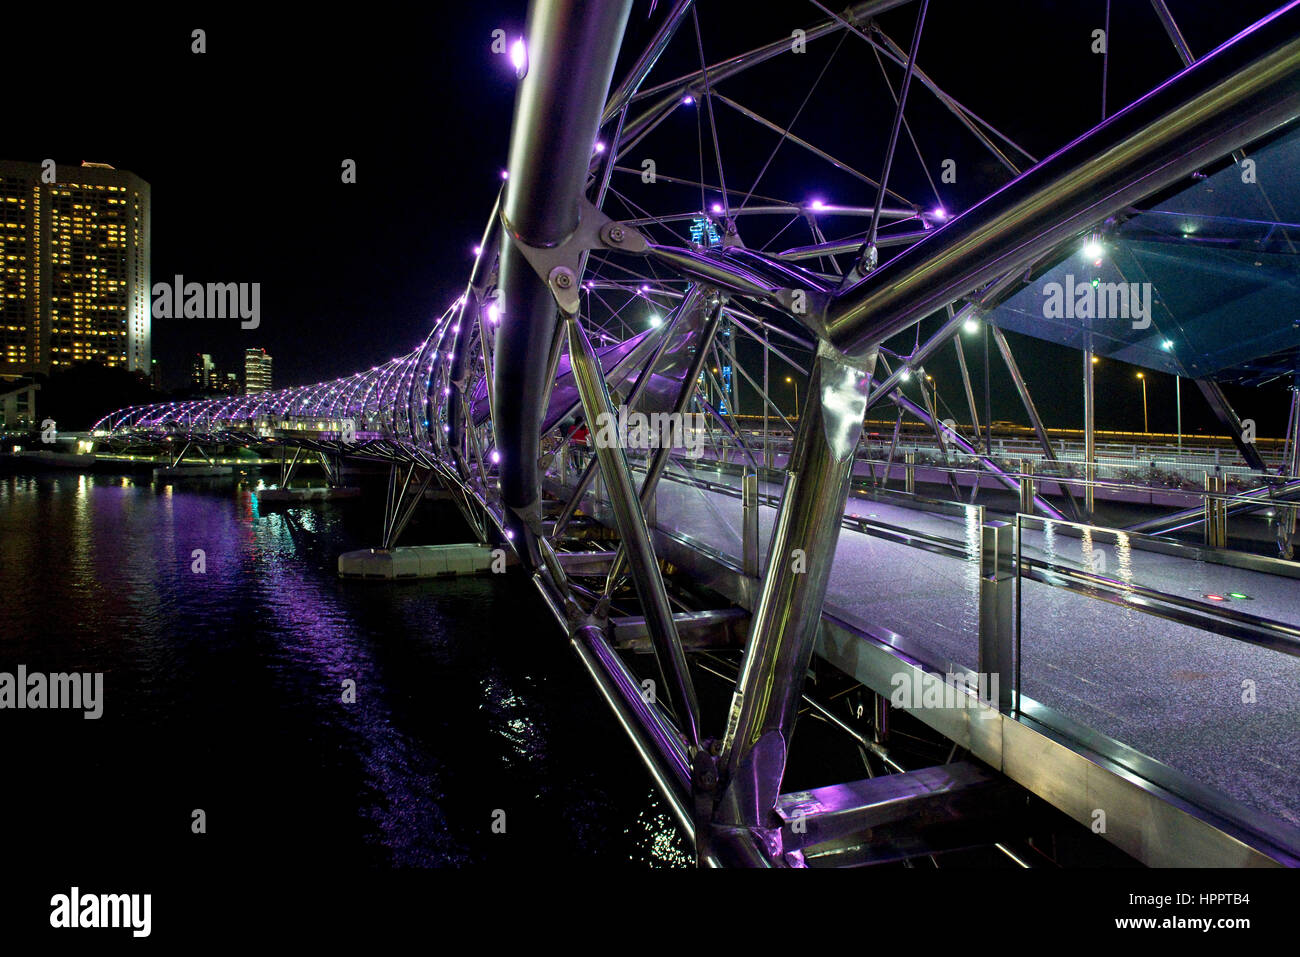 An abstract view of the Helix bridge pedestrian walkway at night in Singapore showing its contempory new tubular steel design. Stock Photo